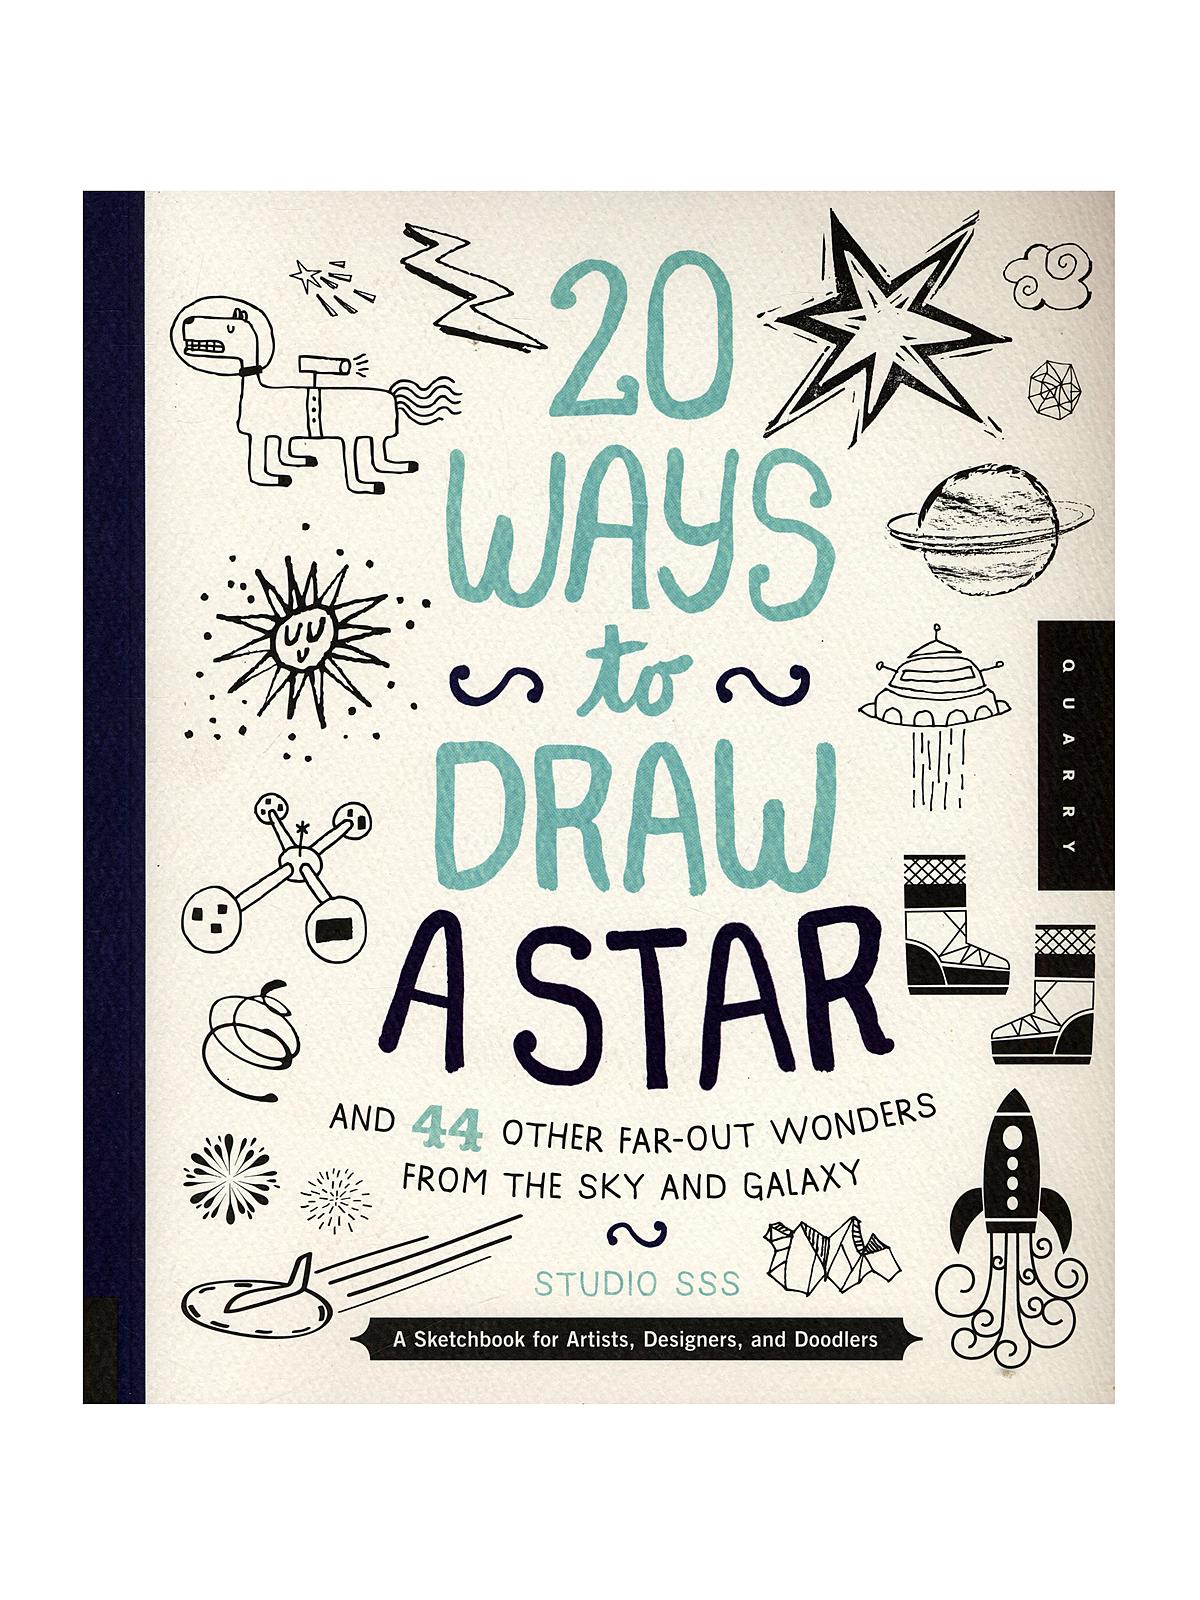 20 Ways Series 20 Ways To Draw A Star And 44 Other Far-out Wonders From The Sky